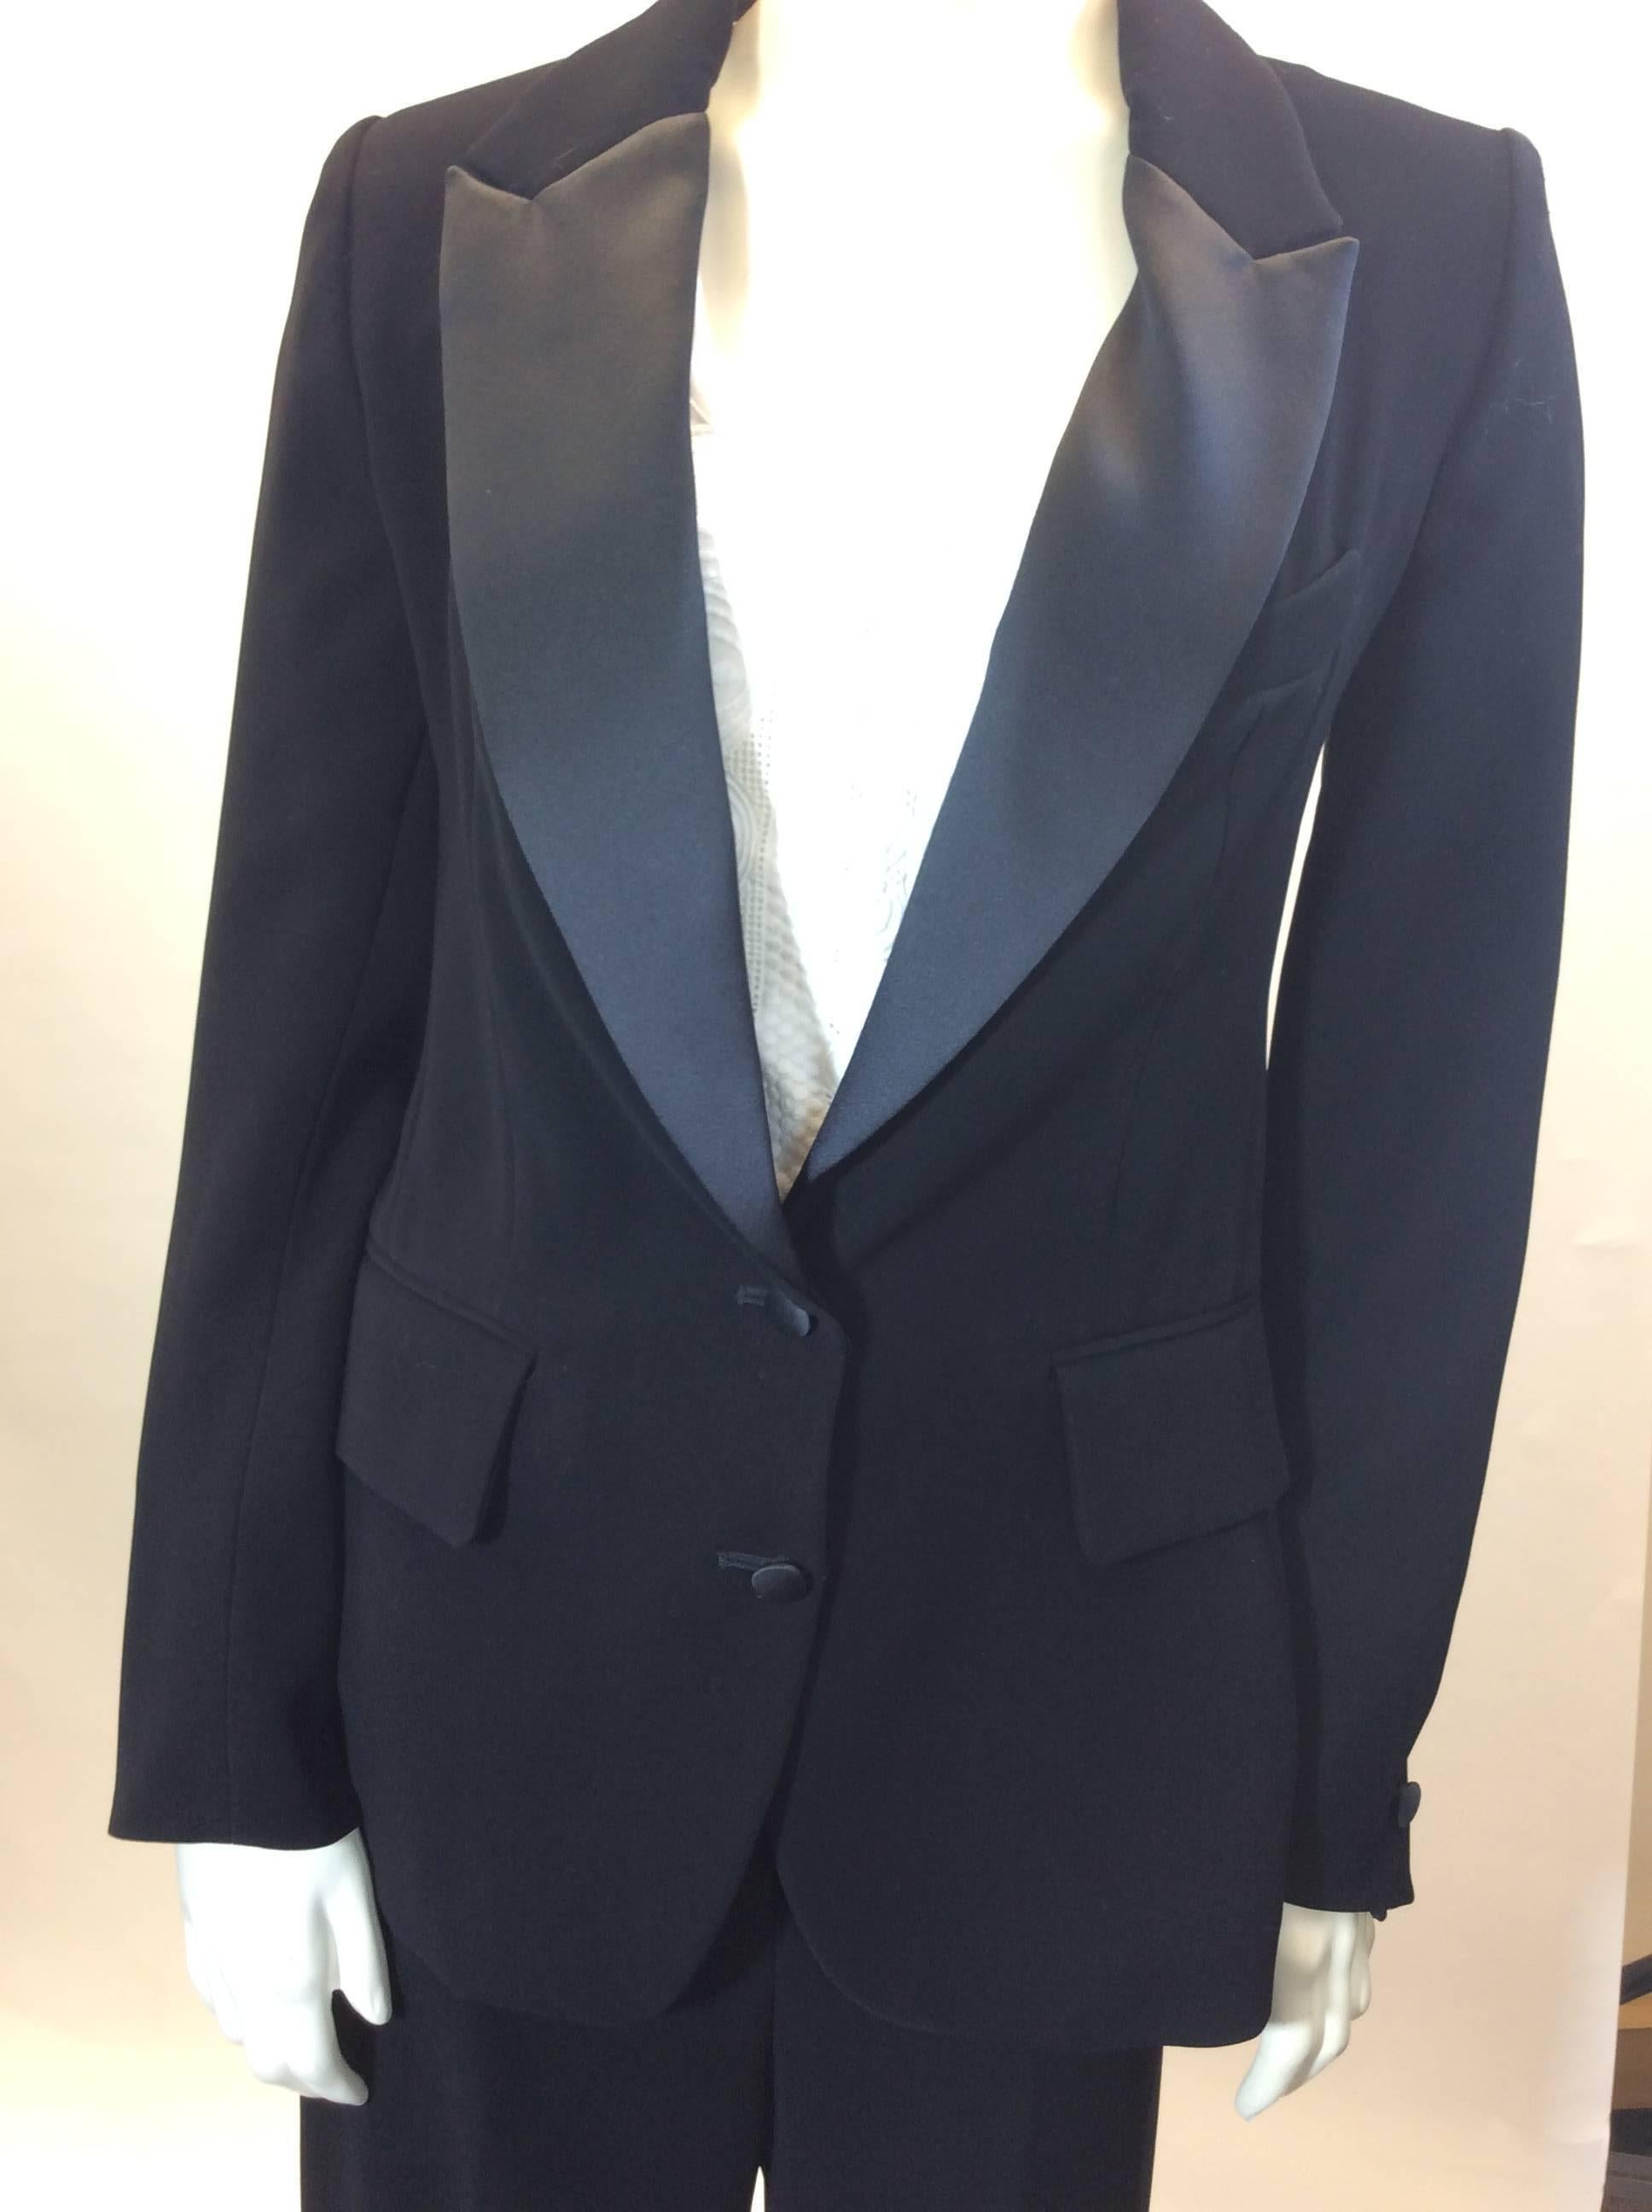 Yves Saint Laurent 2 Piece Tuxedo Pant Suit In Excellent Condition For Sale In Narberth, PA